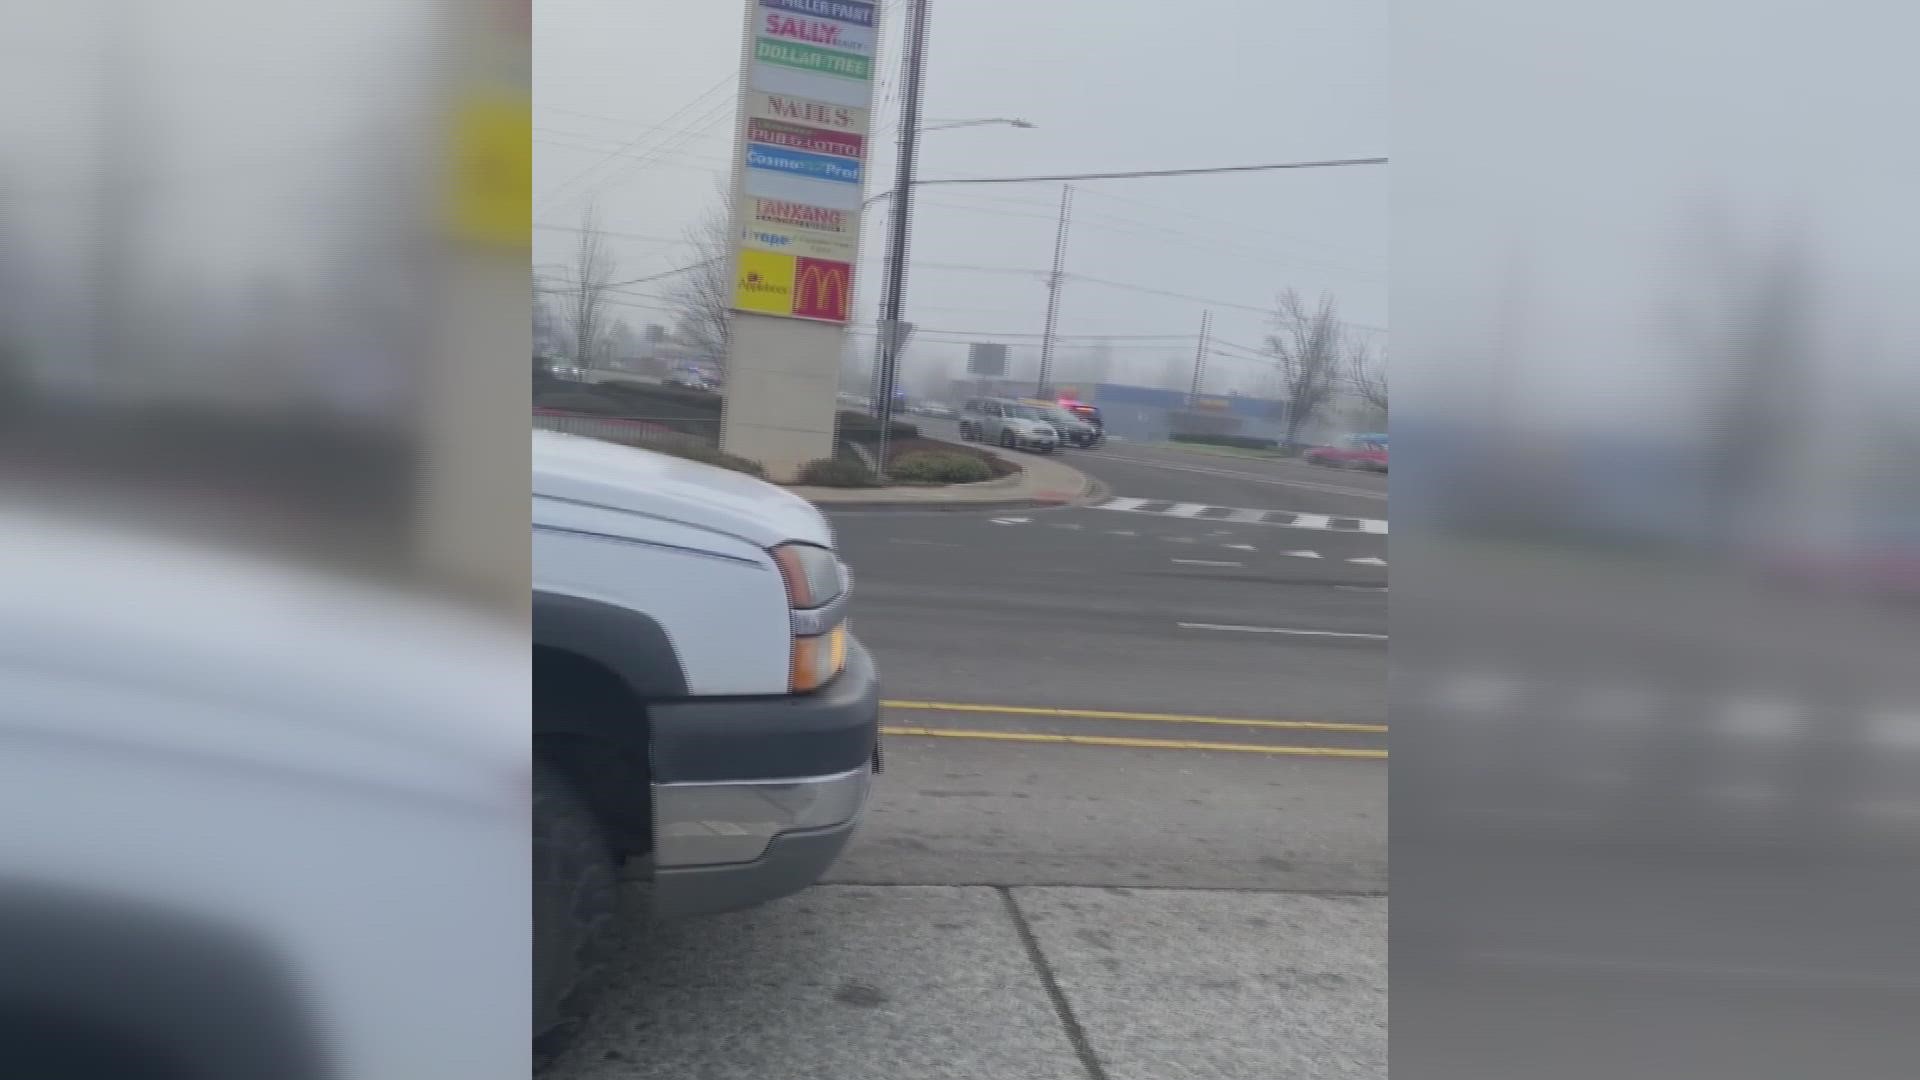 Drivers at the intersection of Kuebler and Commercial Street SE in Salem this morning were stuck waiting as a gun battle raged outside of a nearby auto parts store.